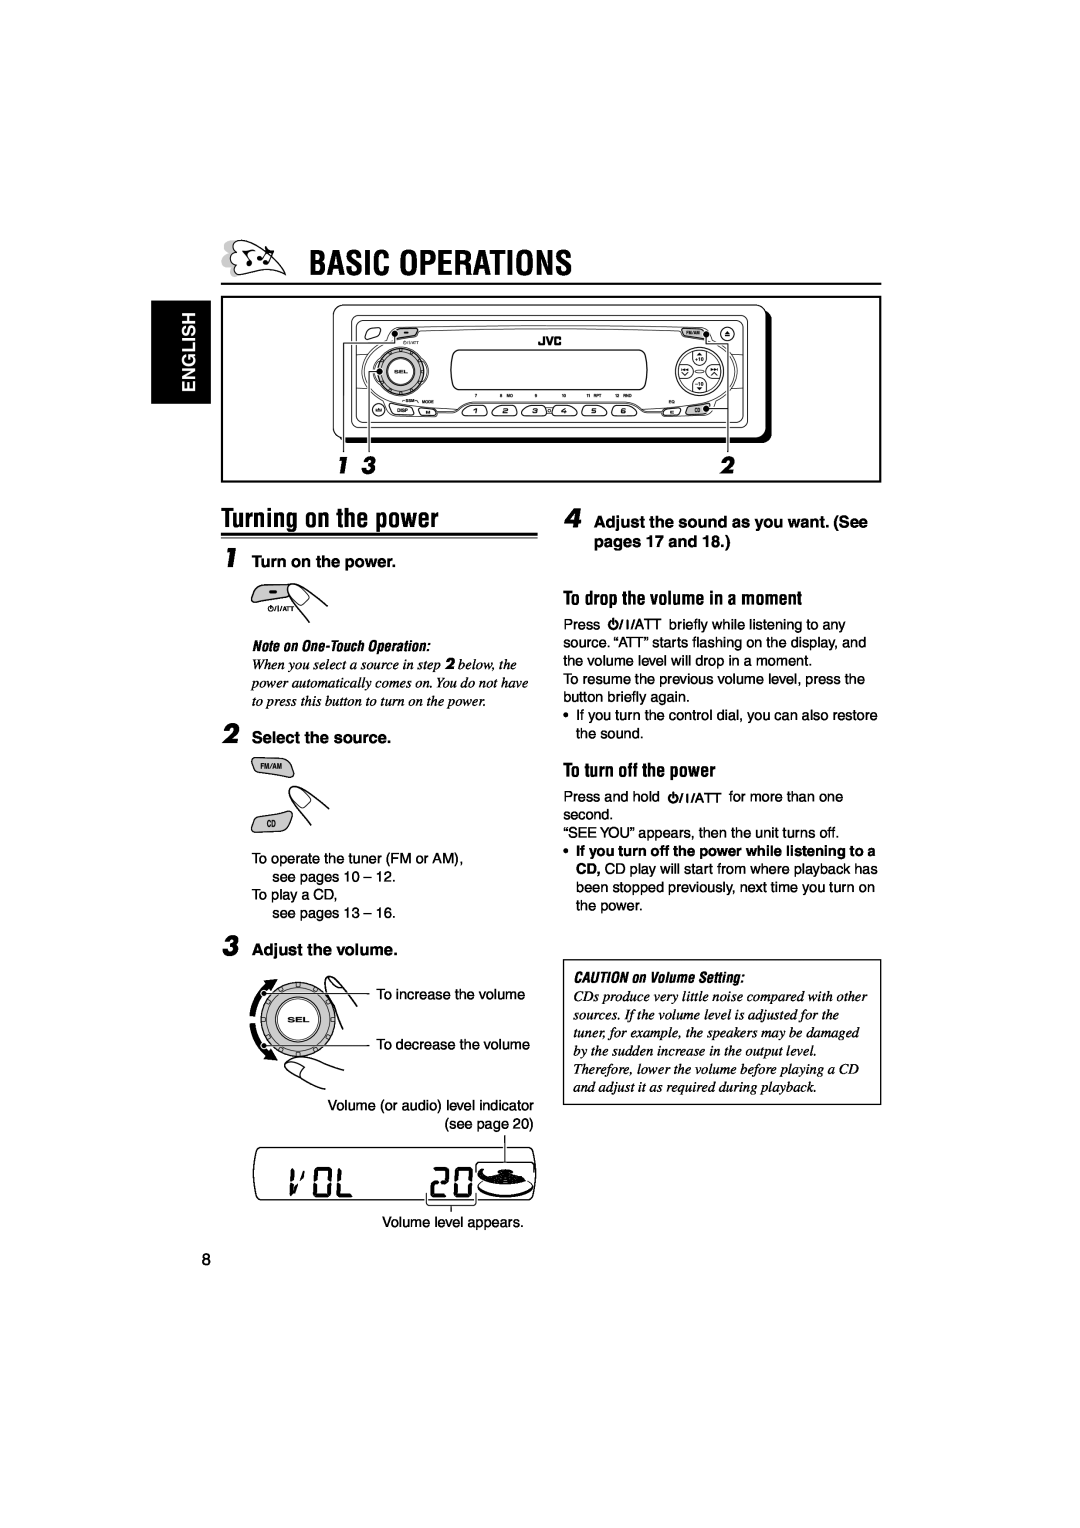 JVC KD-S790 manual Basic Operations, Turning on the power, To drop the volume in a moment, To turn off the power, English 